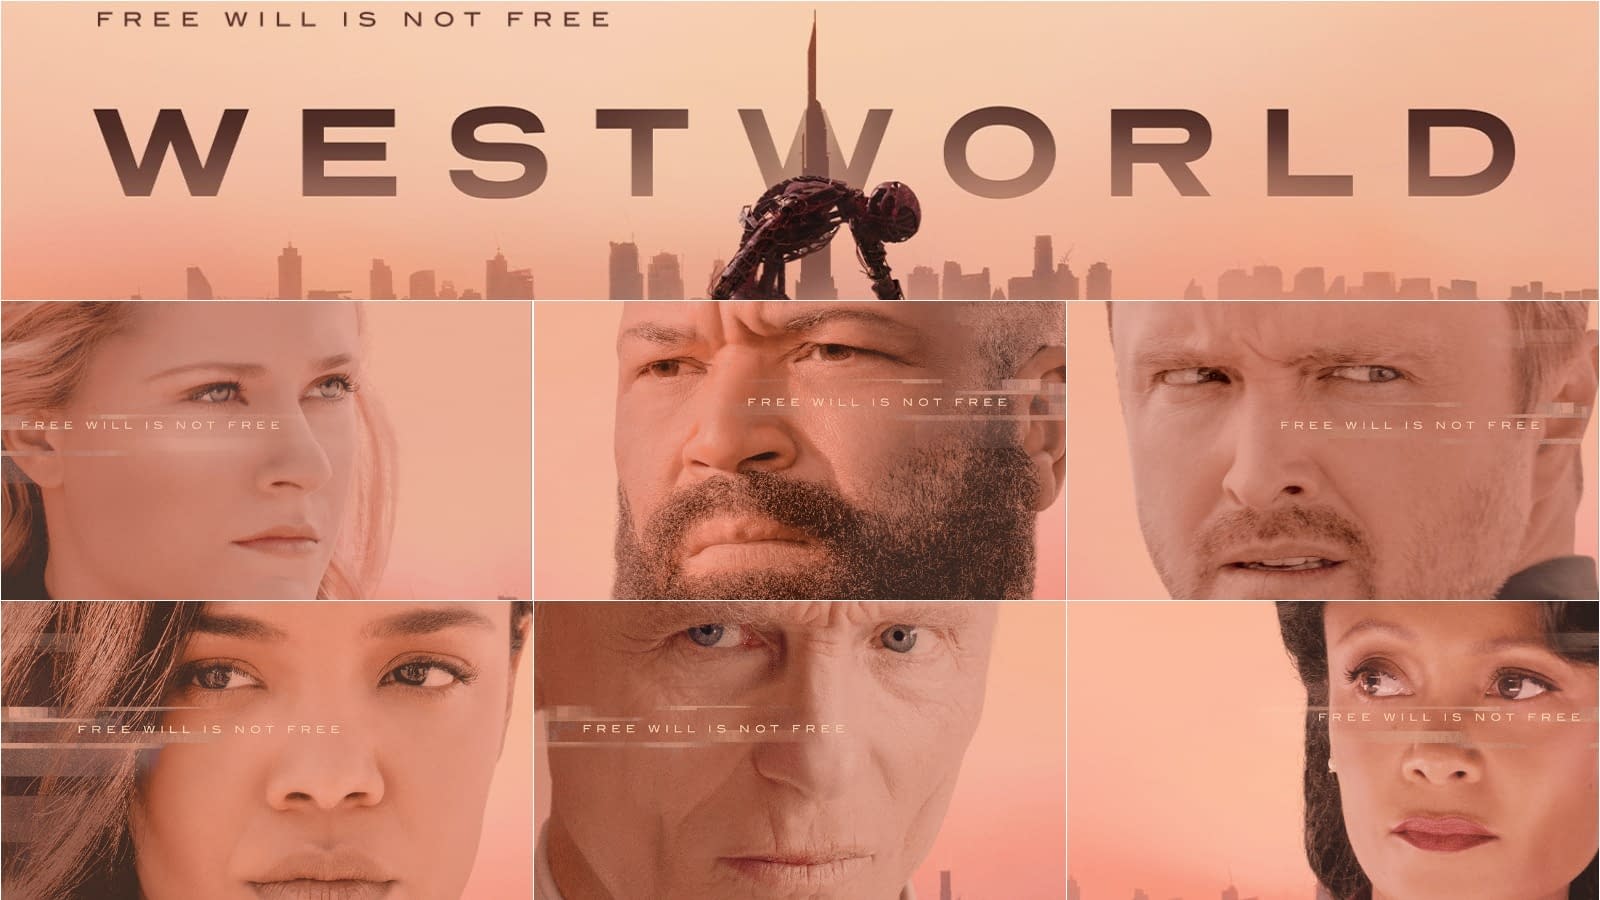 Westworld Season 3 Character Posters With 3 Dire Warnings Preview